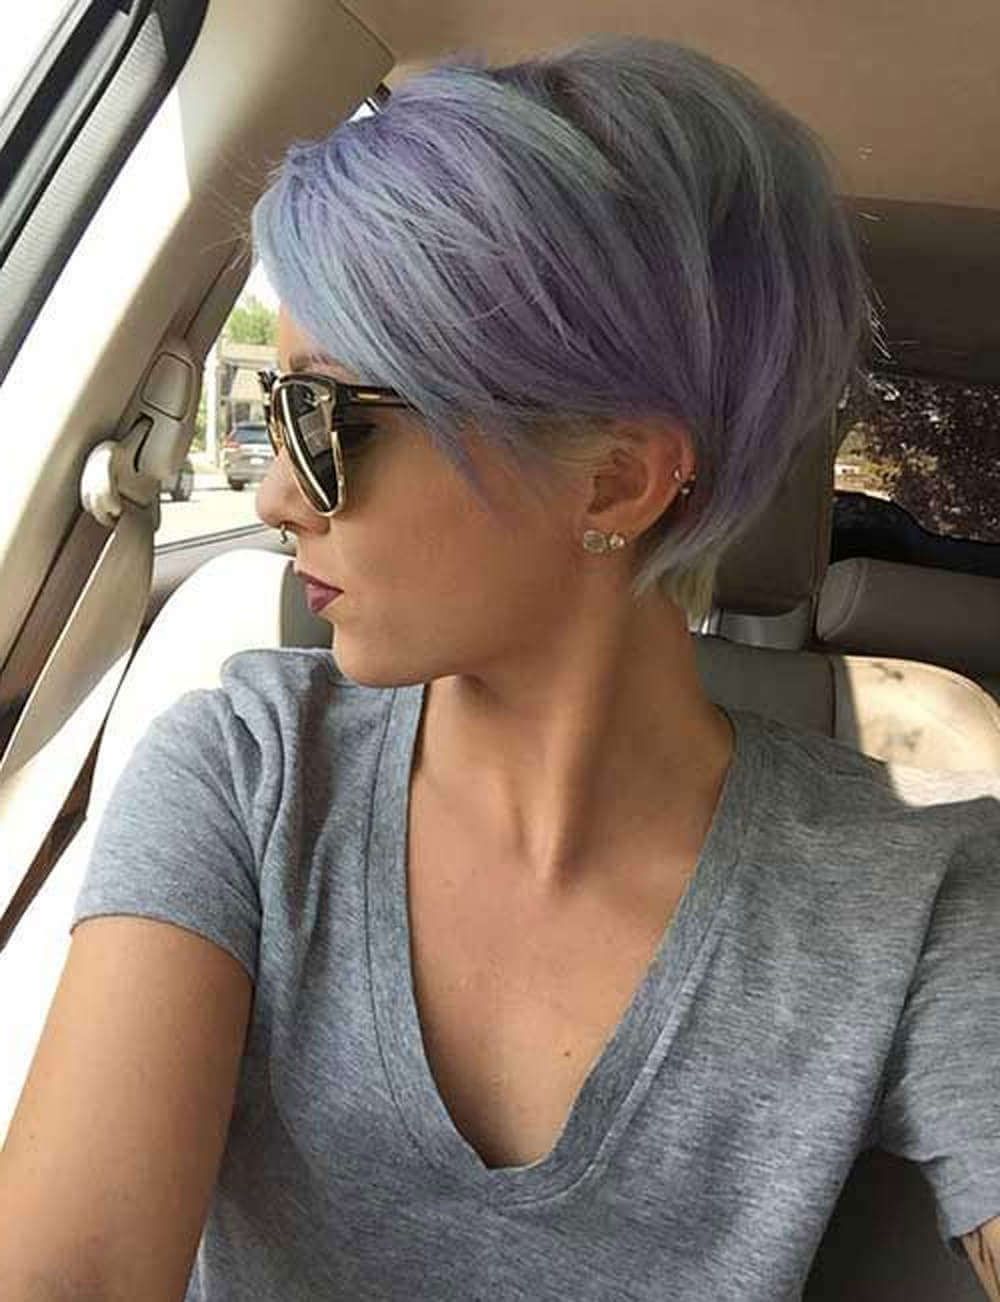 2018 Rocker Pixie Hairstyles Regarding 50 Pixie Haircuts You'll See Trending In  (View 11 of 20)